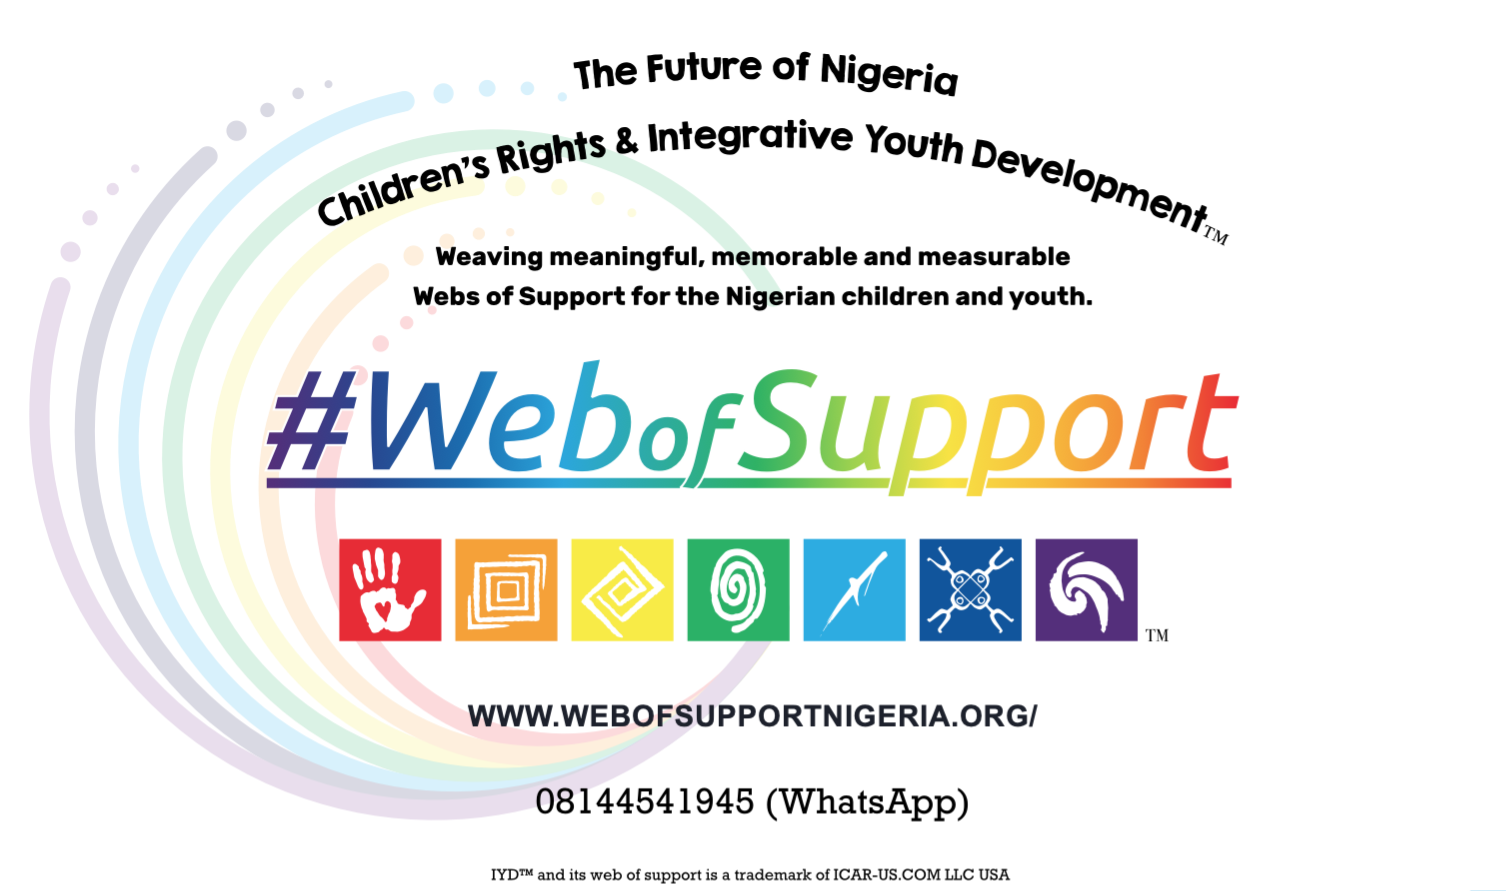 Web of Support Nigeria's banner announcing the work of IYD™ and Children's Rights.